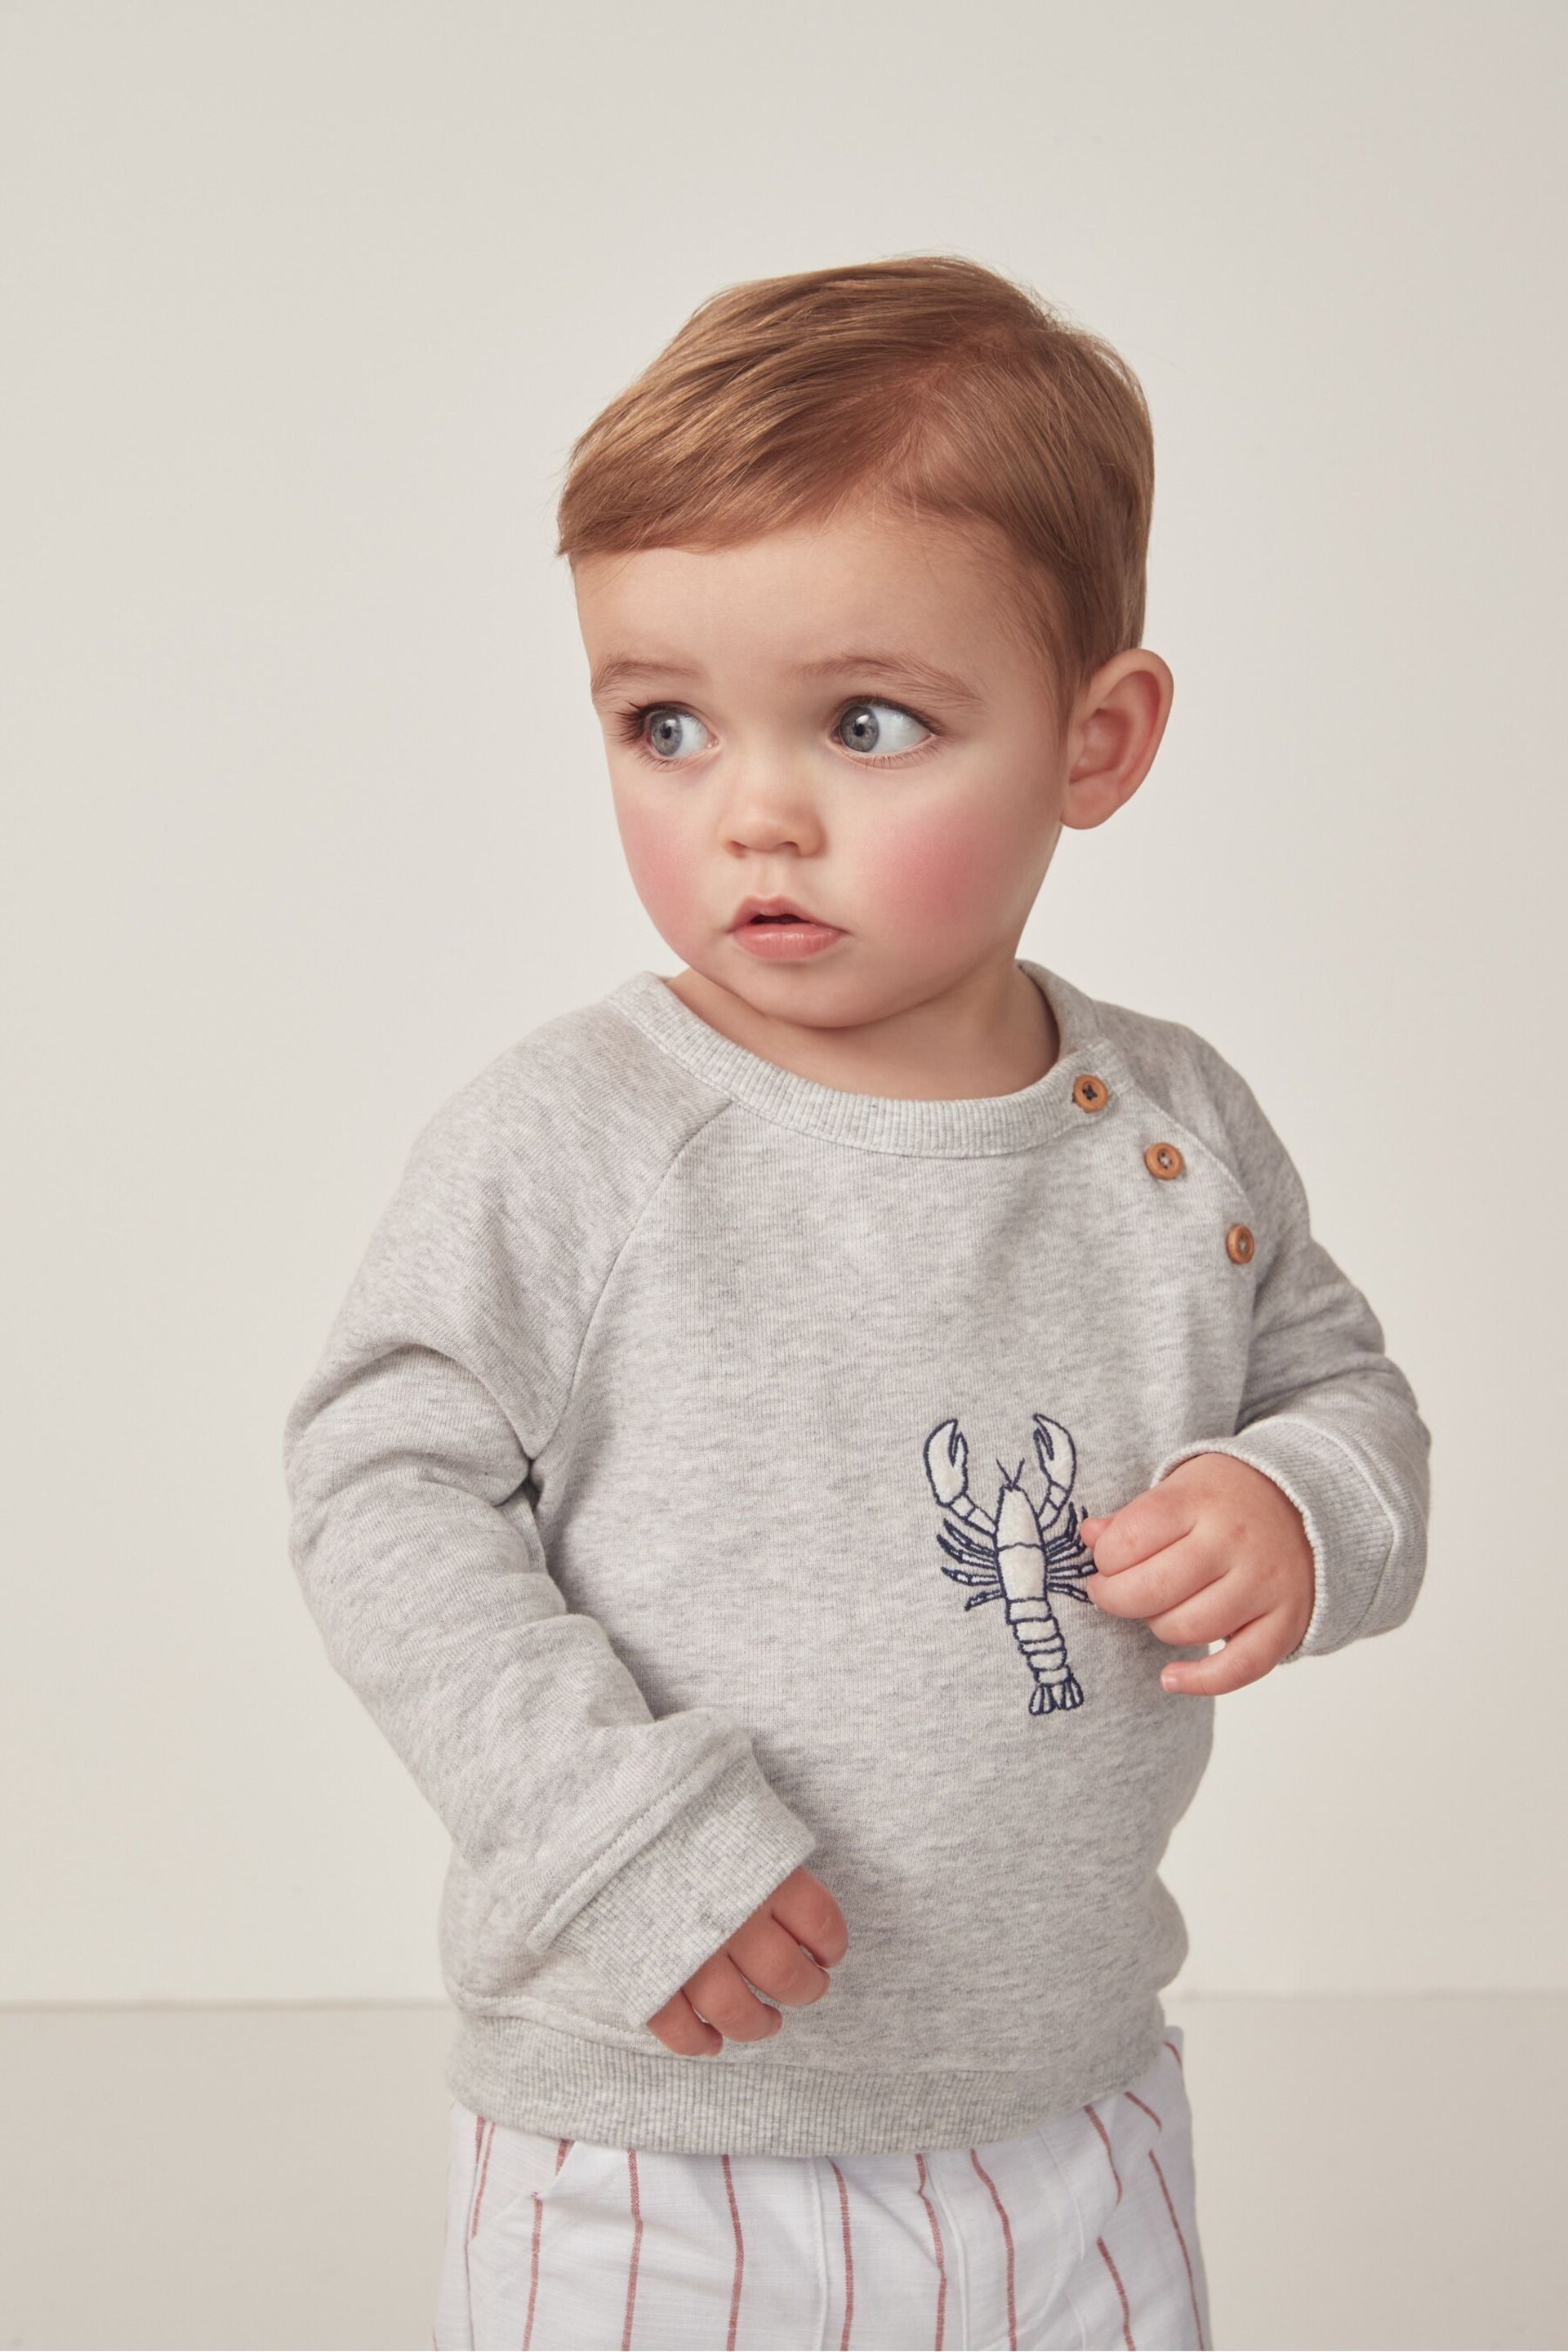 The White Company Grey Cotton Lobster Sweatshirt - Image 4 of 7